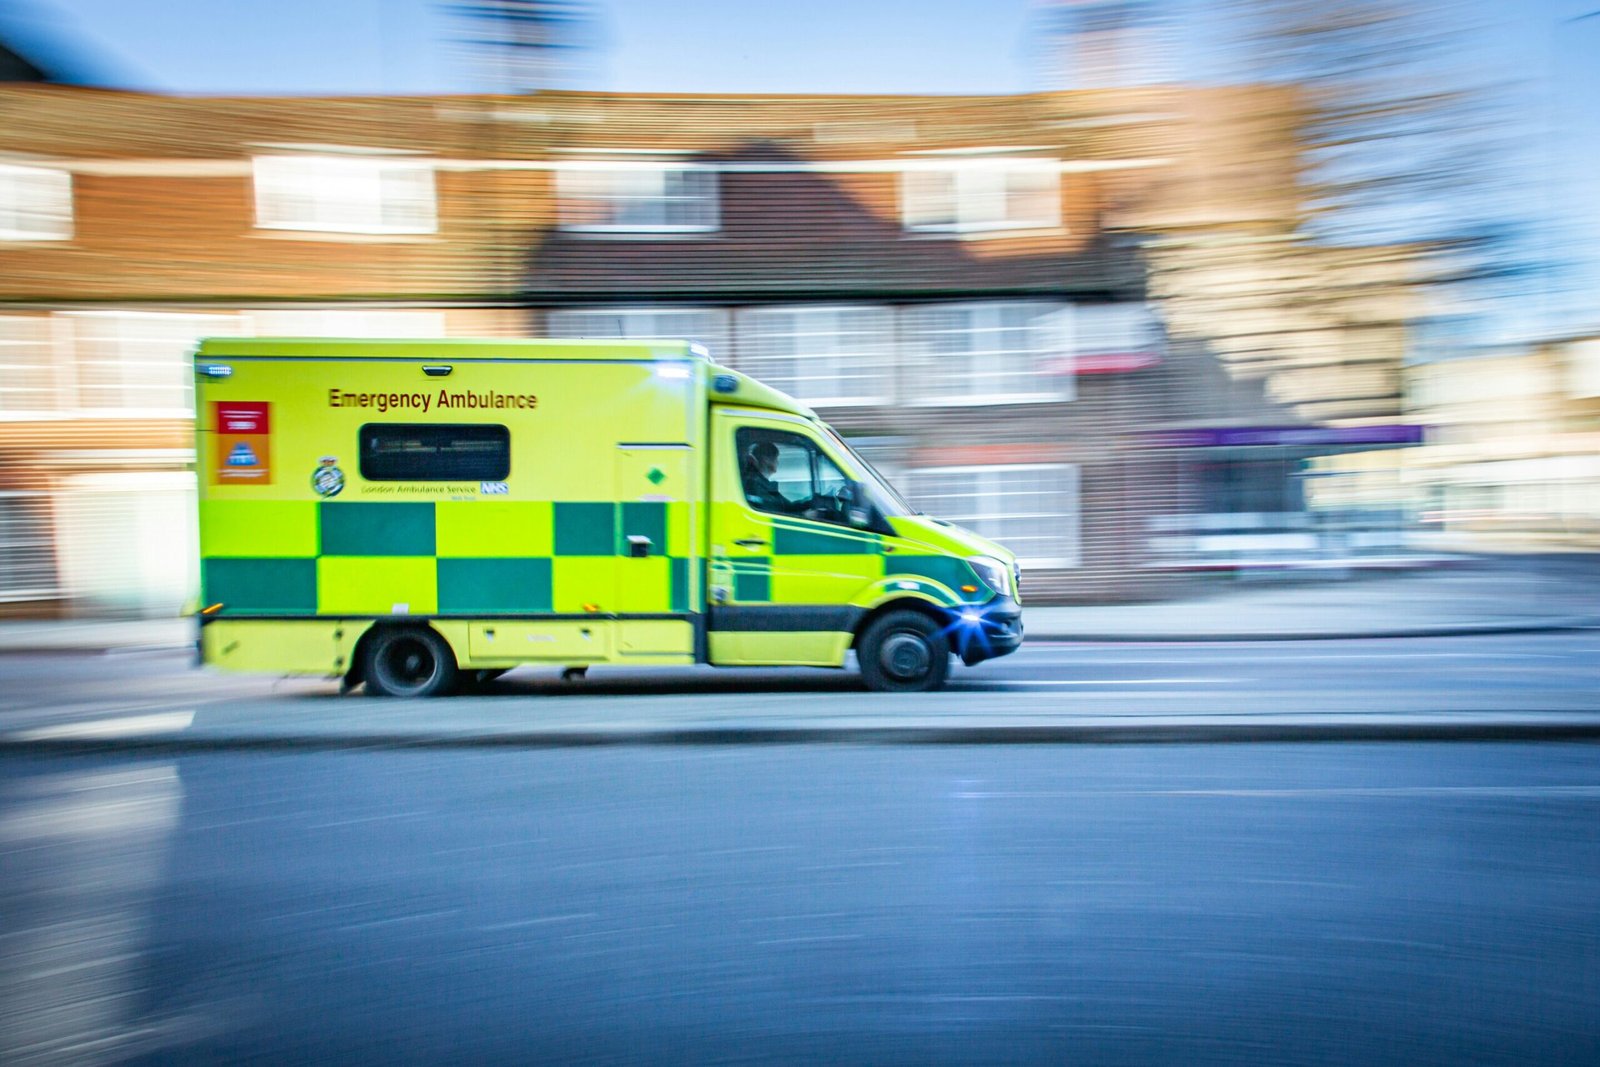 Experts say next UK government should declare a national health and care emergency